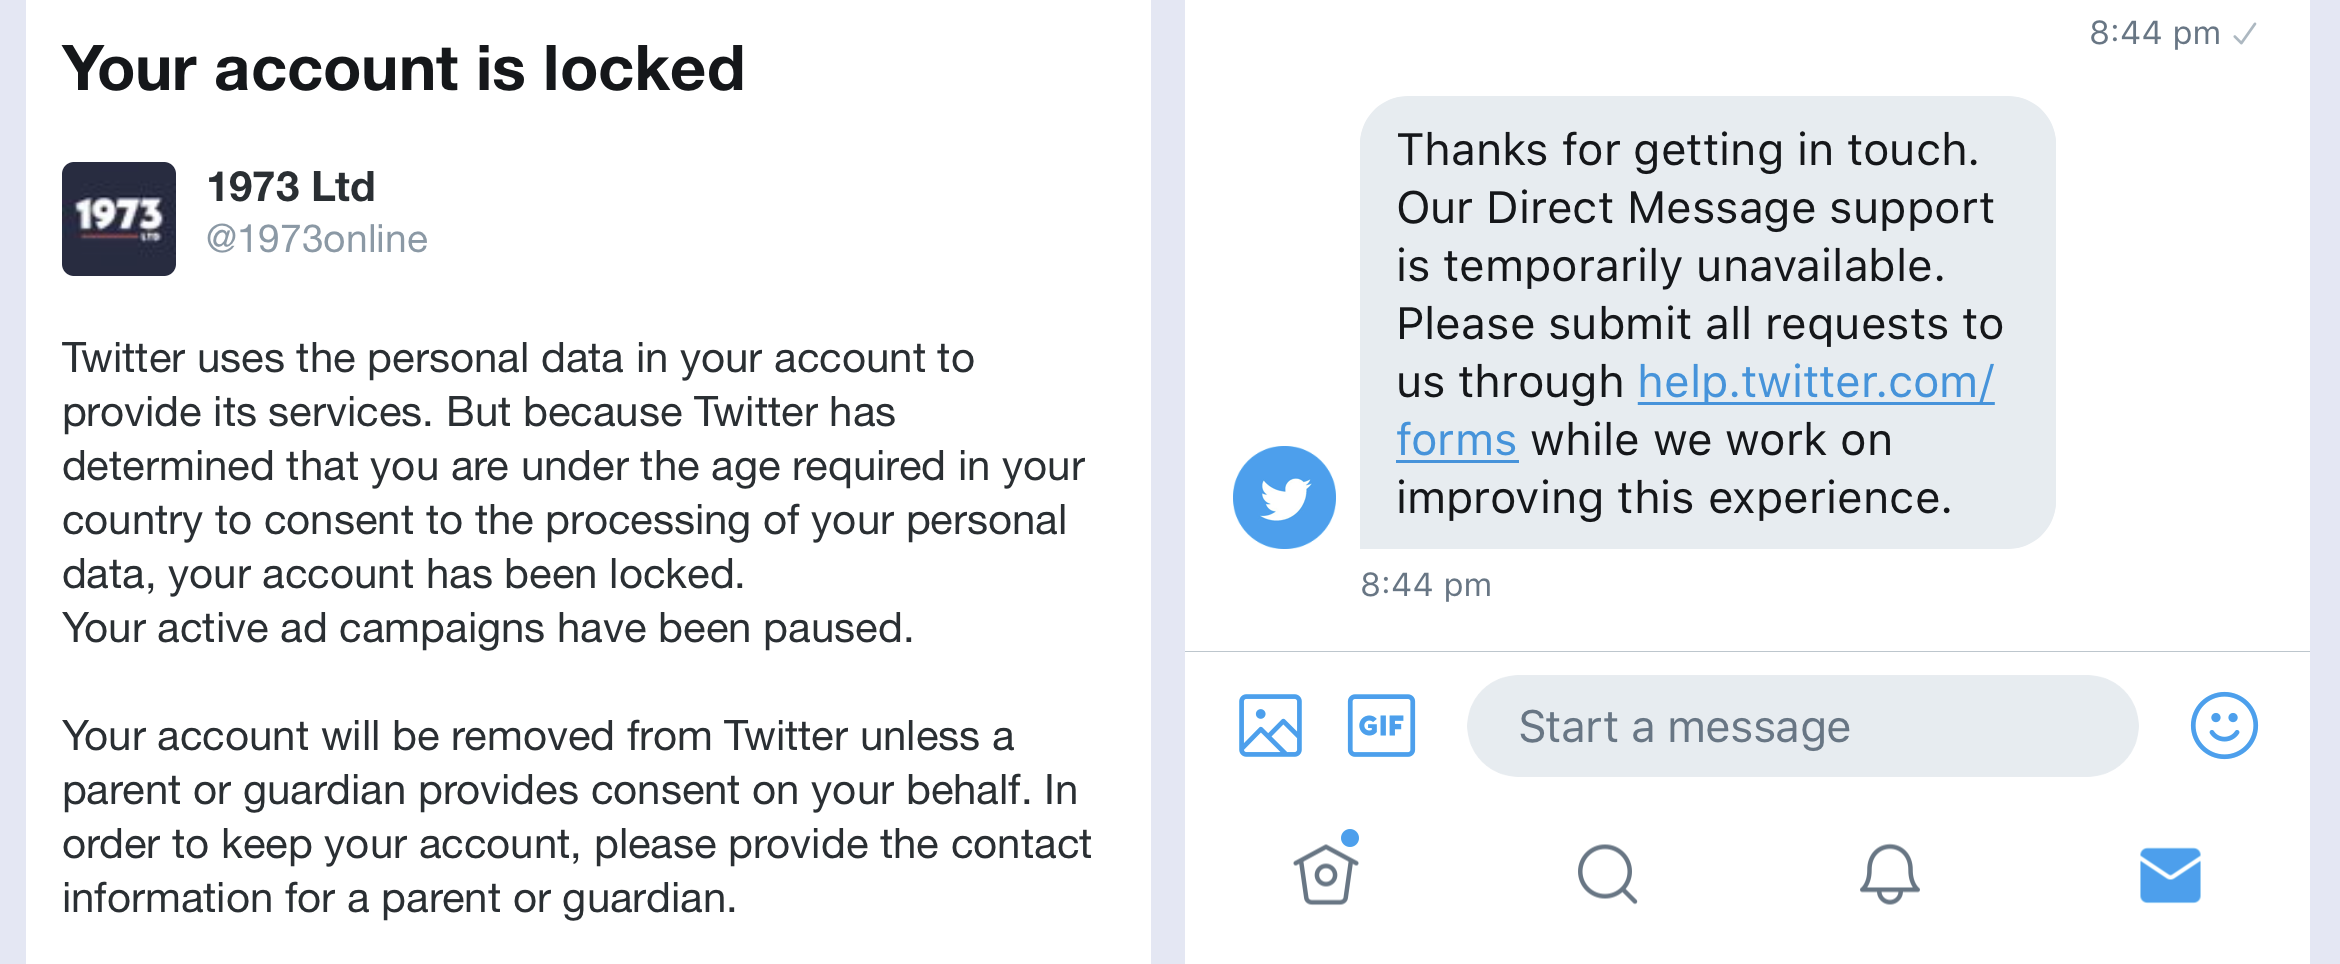 Twitter locked account issue